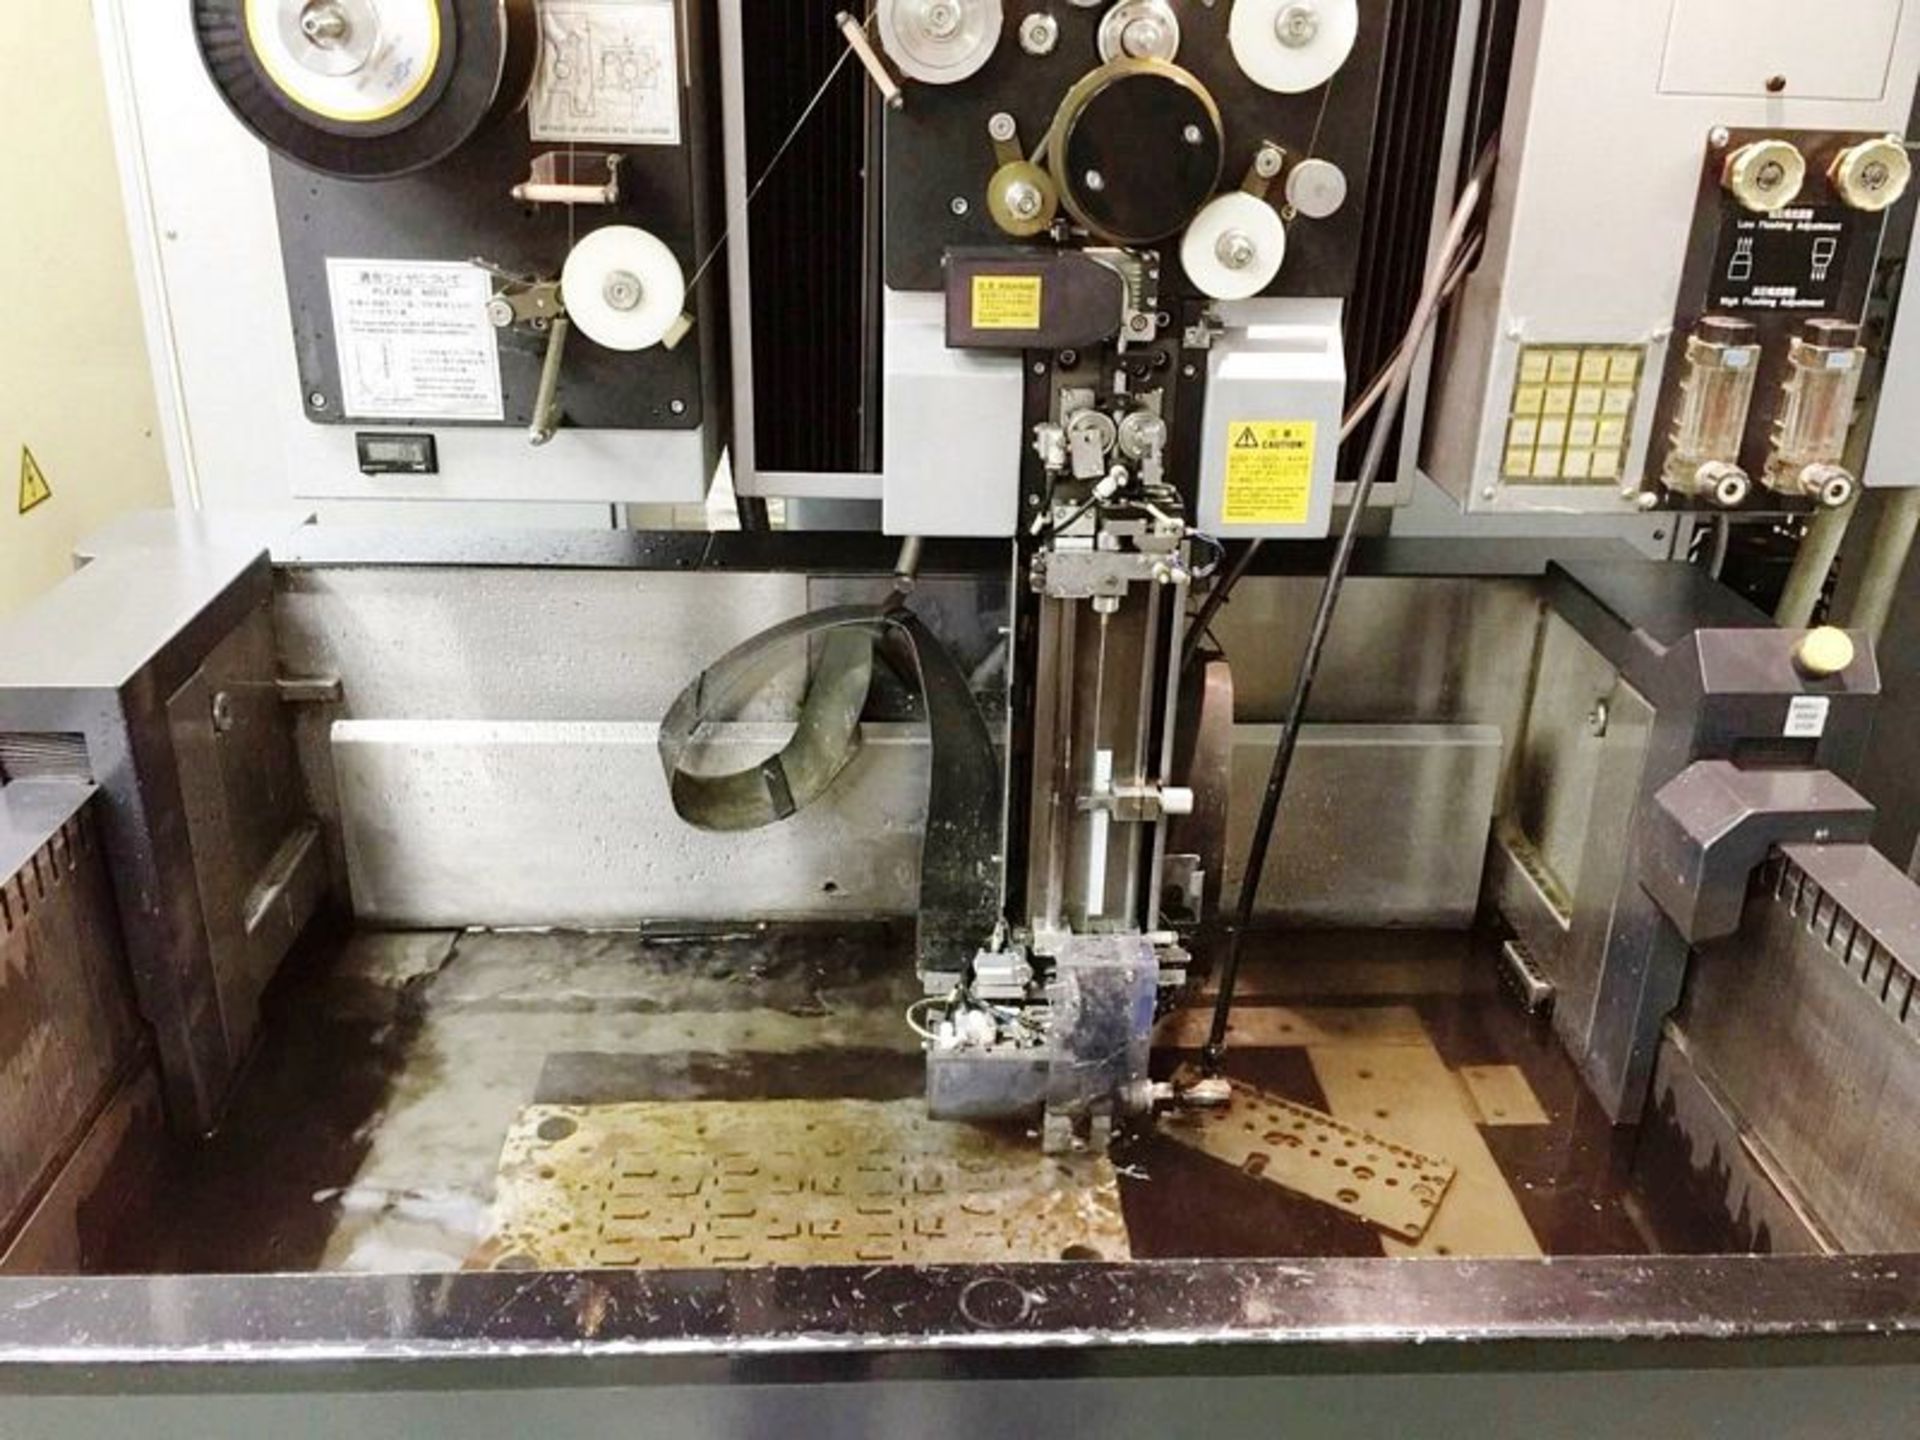 SODICK AG600L CNC 5-AXIS WIRE CUT ELECTRICAL DISCHARGE MACHINE (EDM), S/N 363, New 2011 - Image 2 of 7